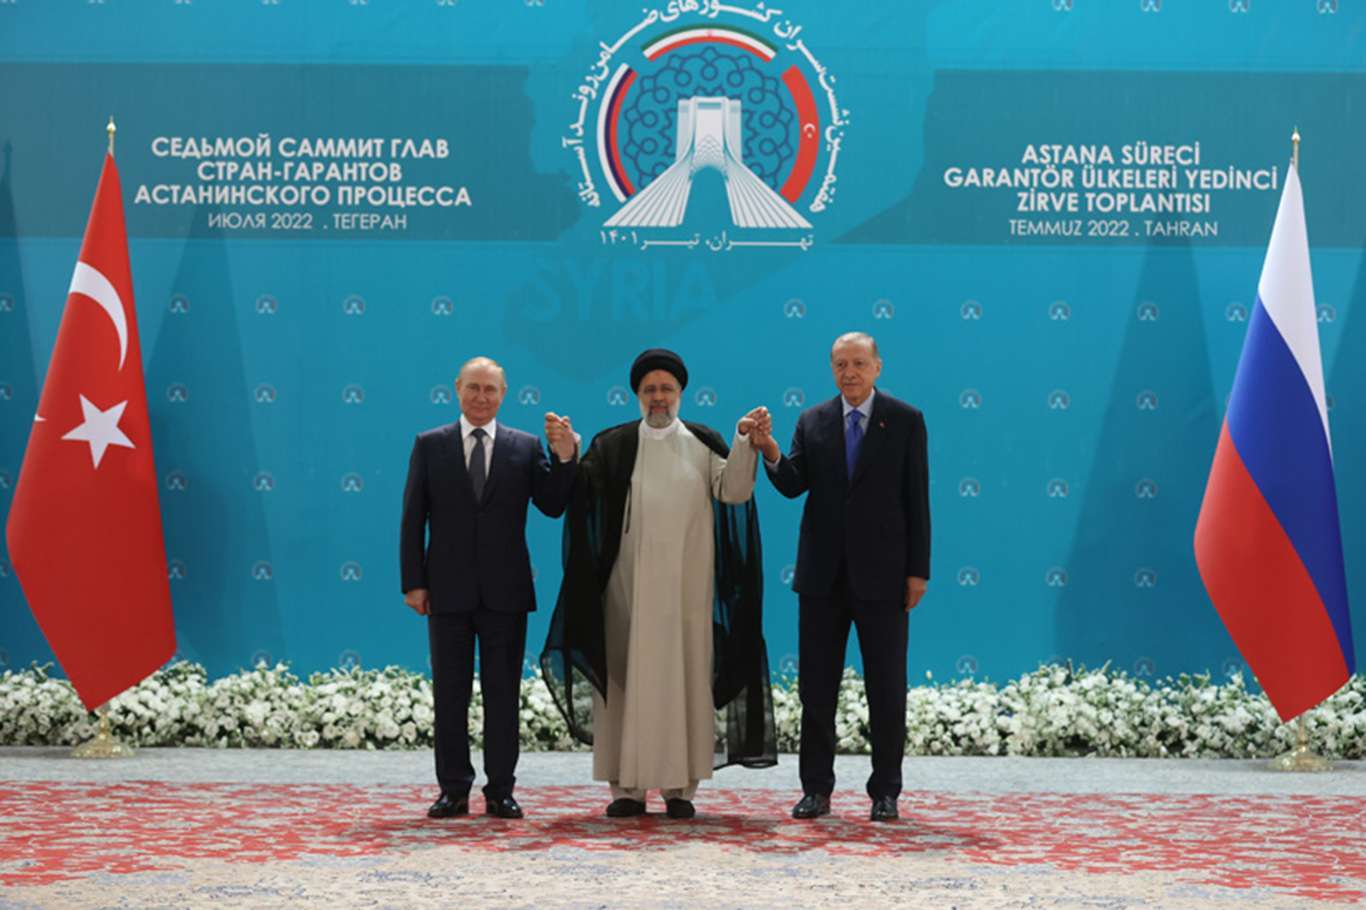 Turkey, Russia, Iran issues joint statement after meeting in Tehran